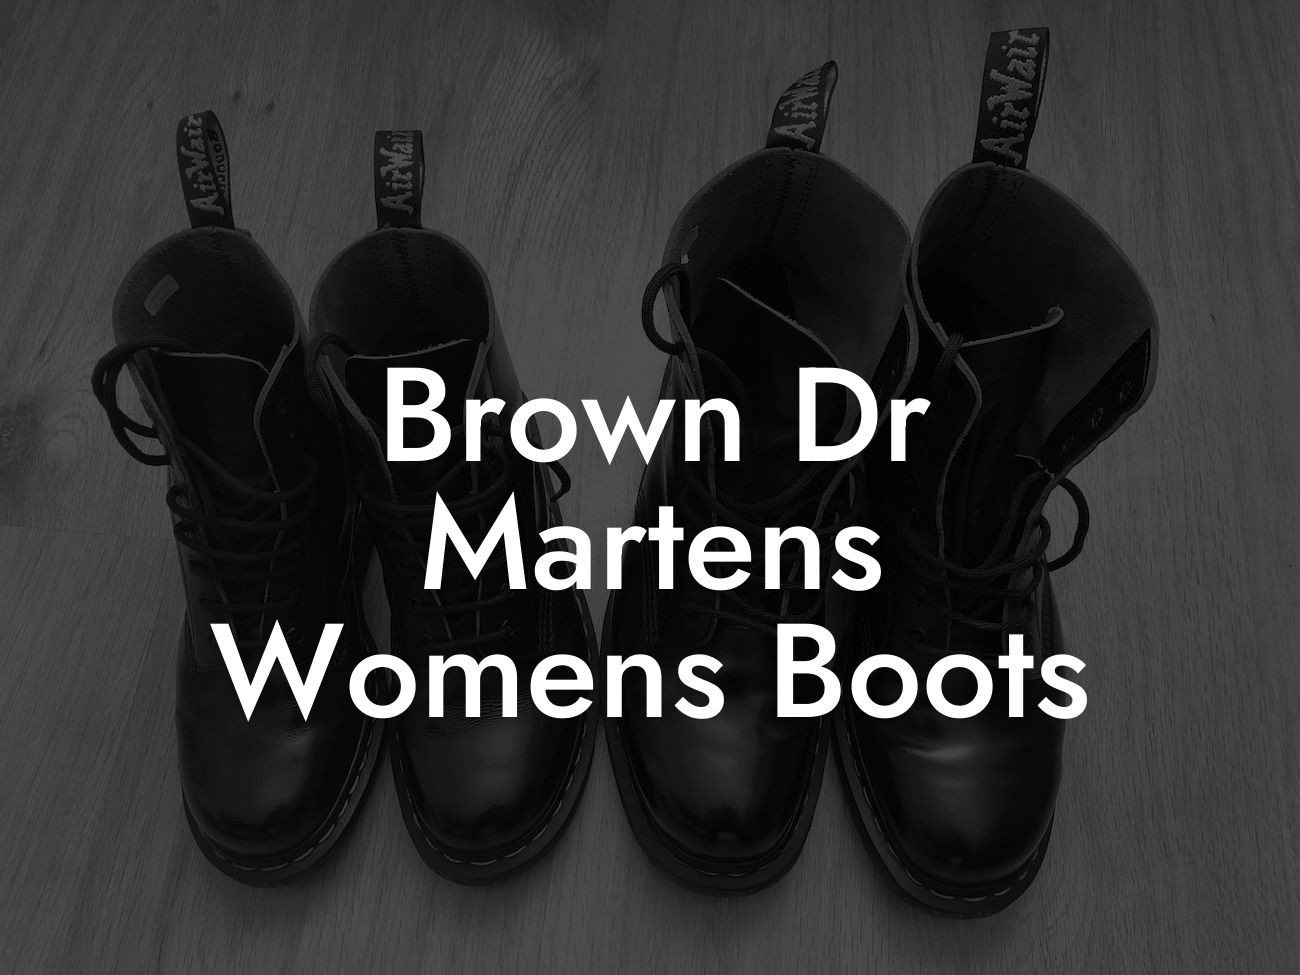 Brown Dr Martens Womens Boots